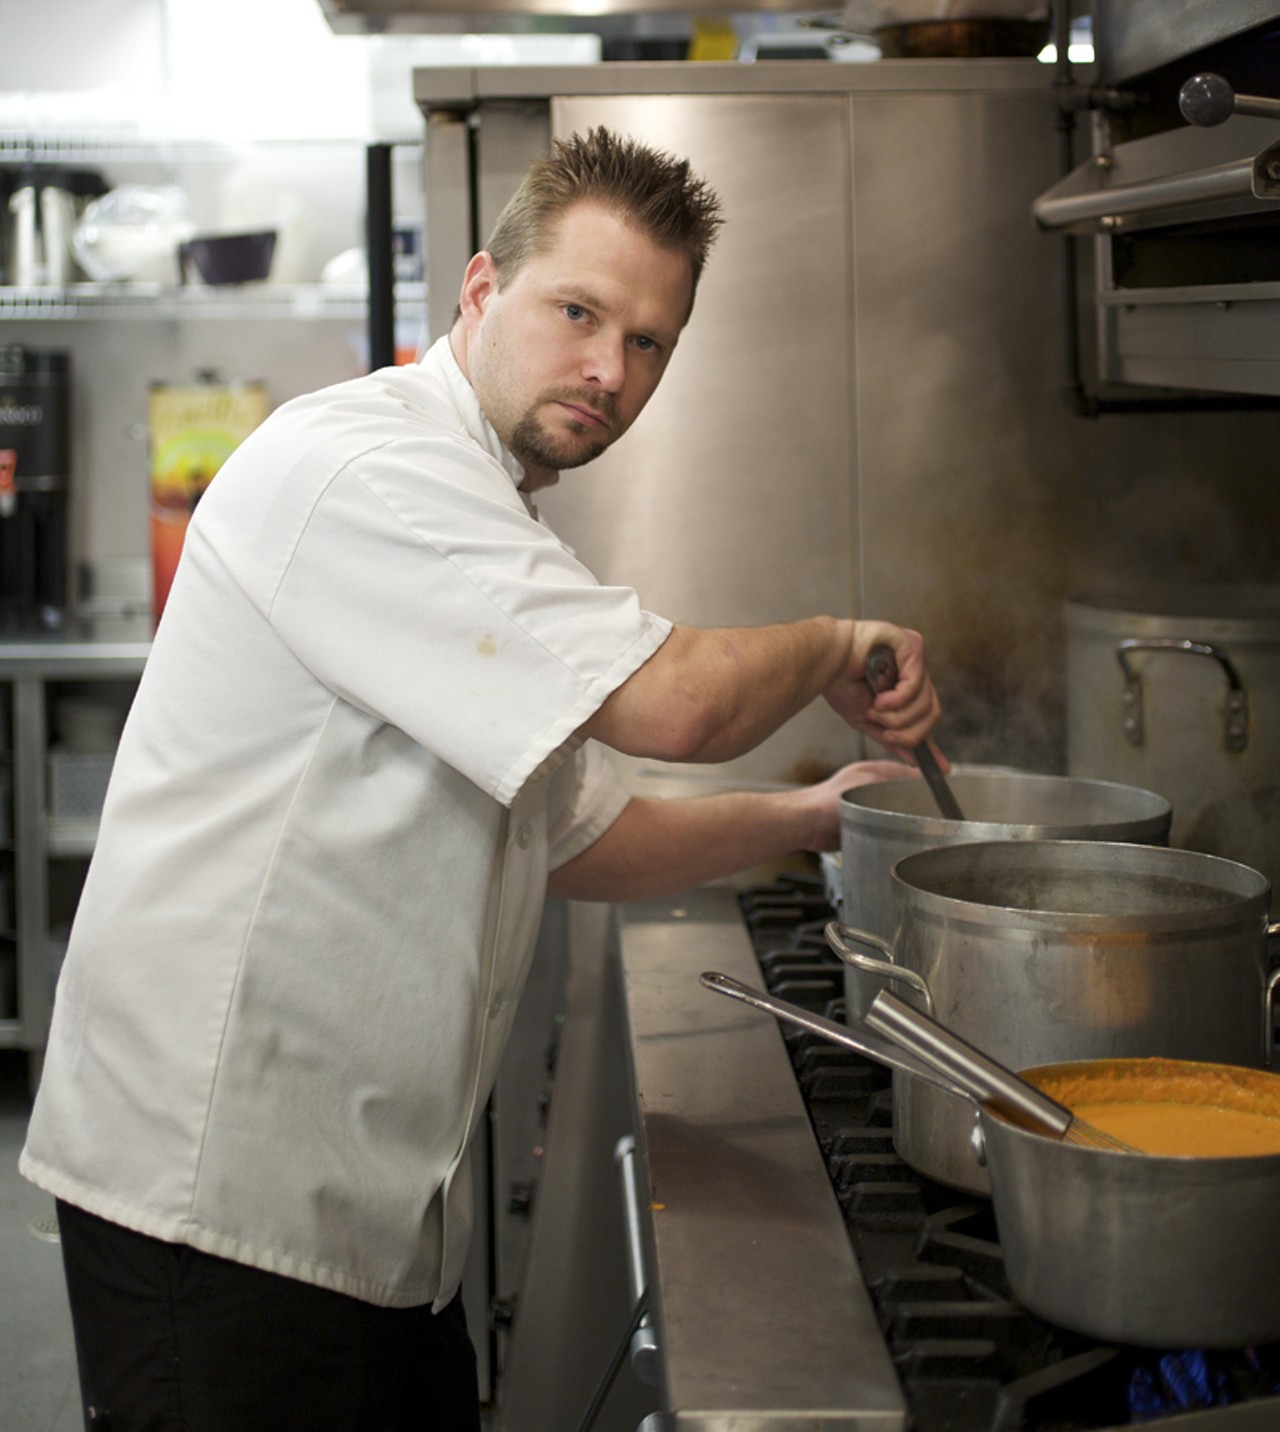 Executive Chef John Buchanan checking on his soups and sauces before the evening crowd arrives.